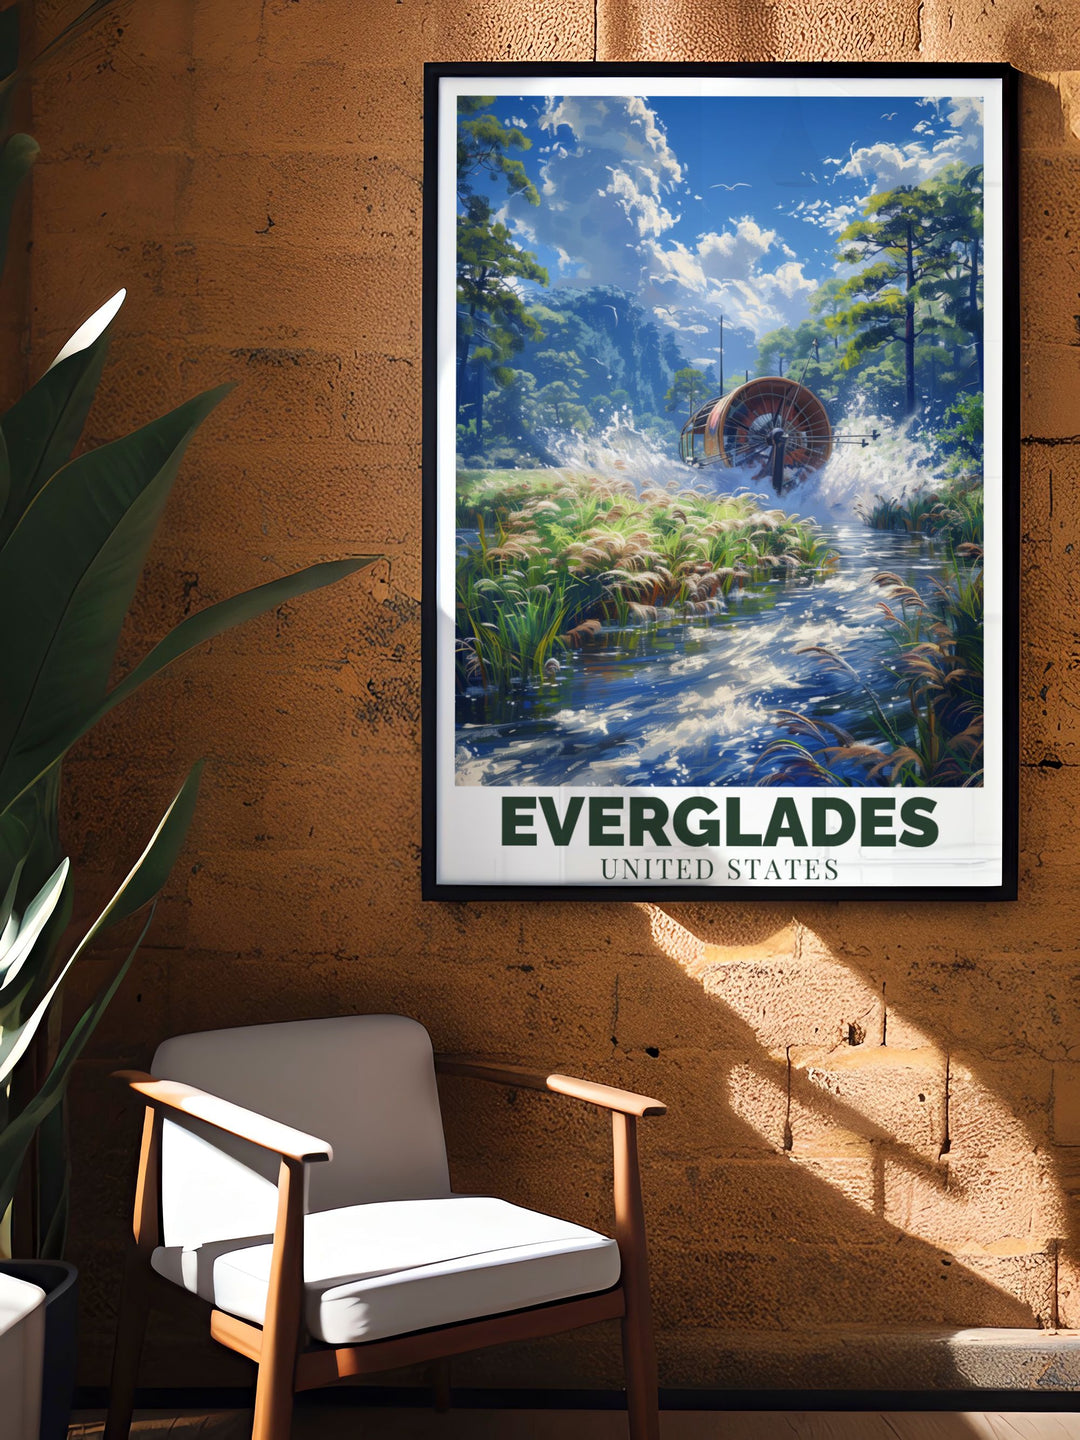 National Park Art featuring the tranquil marshes and vibrant ecosystems of the Everglades. Ideal for home decor and nature enthusiasts. This print includes the exciting Airboat ride through the 10K islands, making it a standout piece.